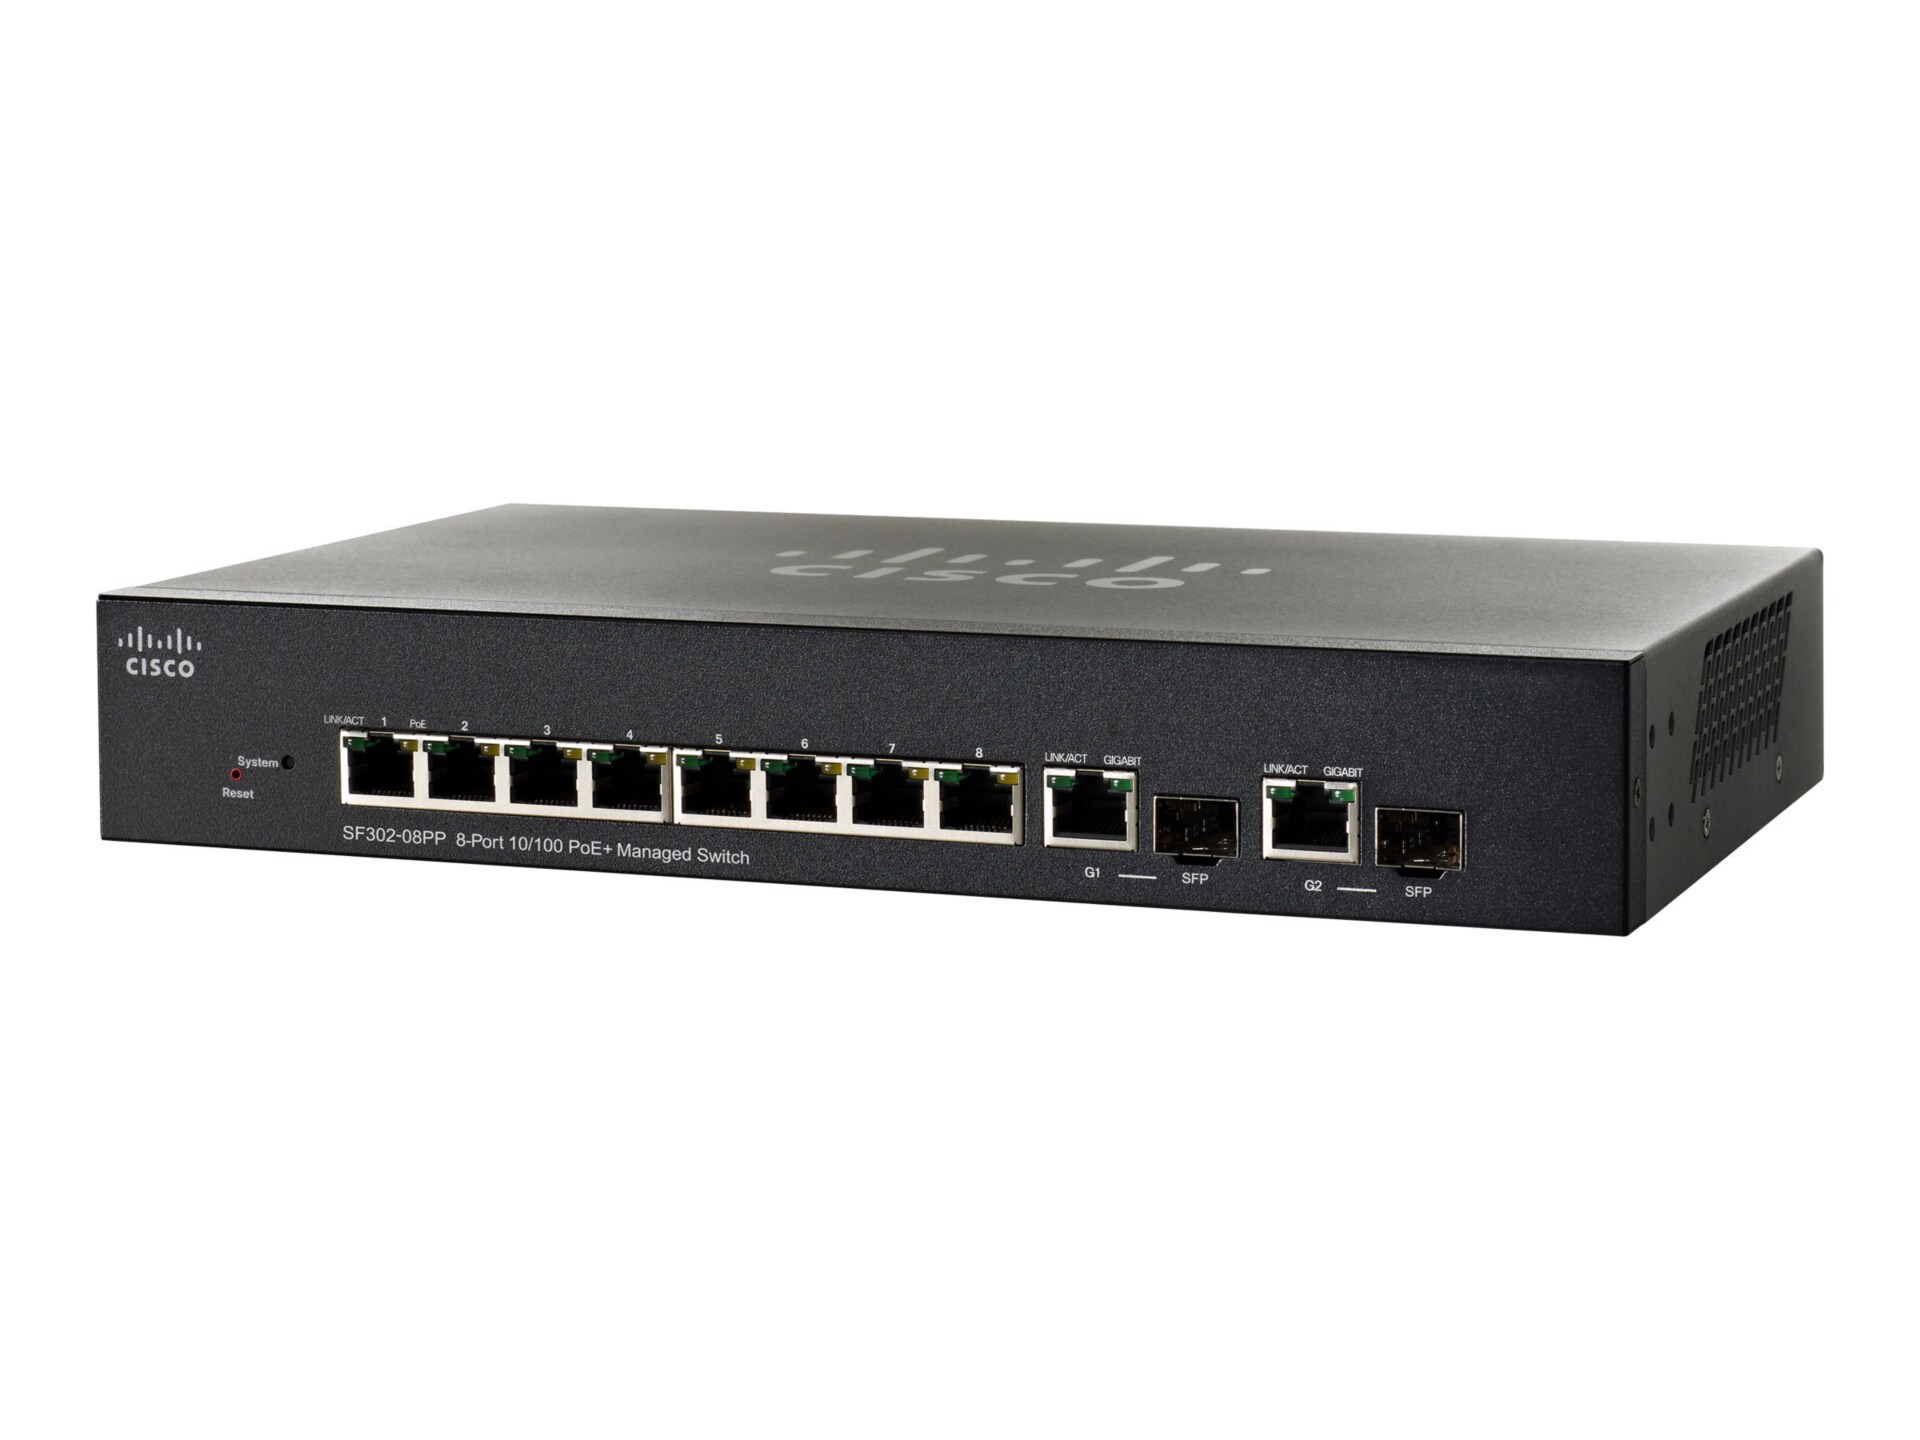 Cisco Small Business SF302-08PP 8-Port Fast Ethernet Switch